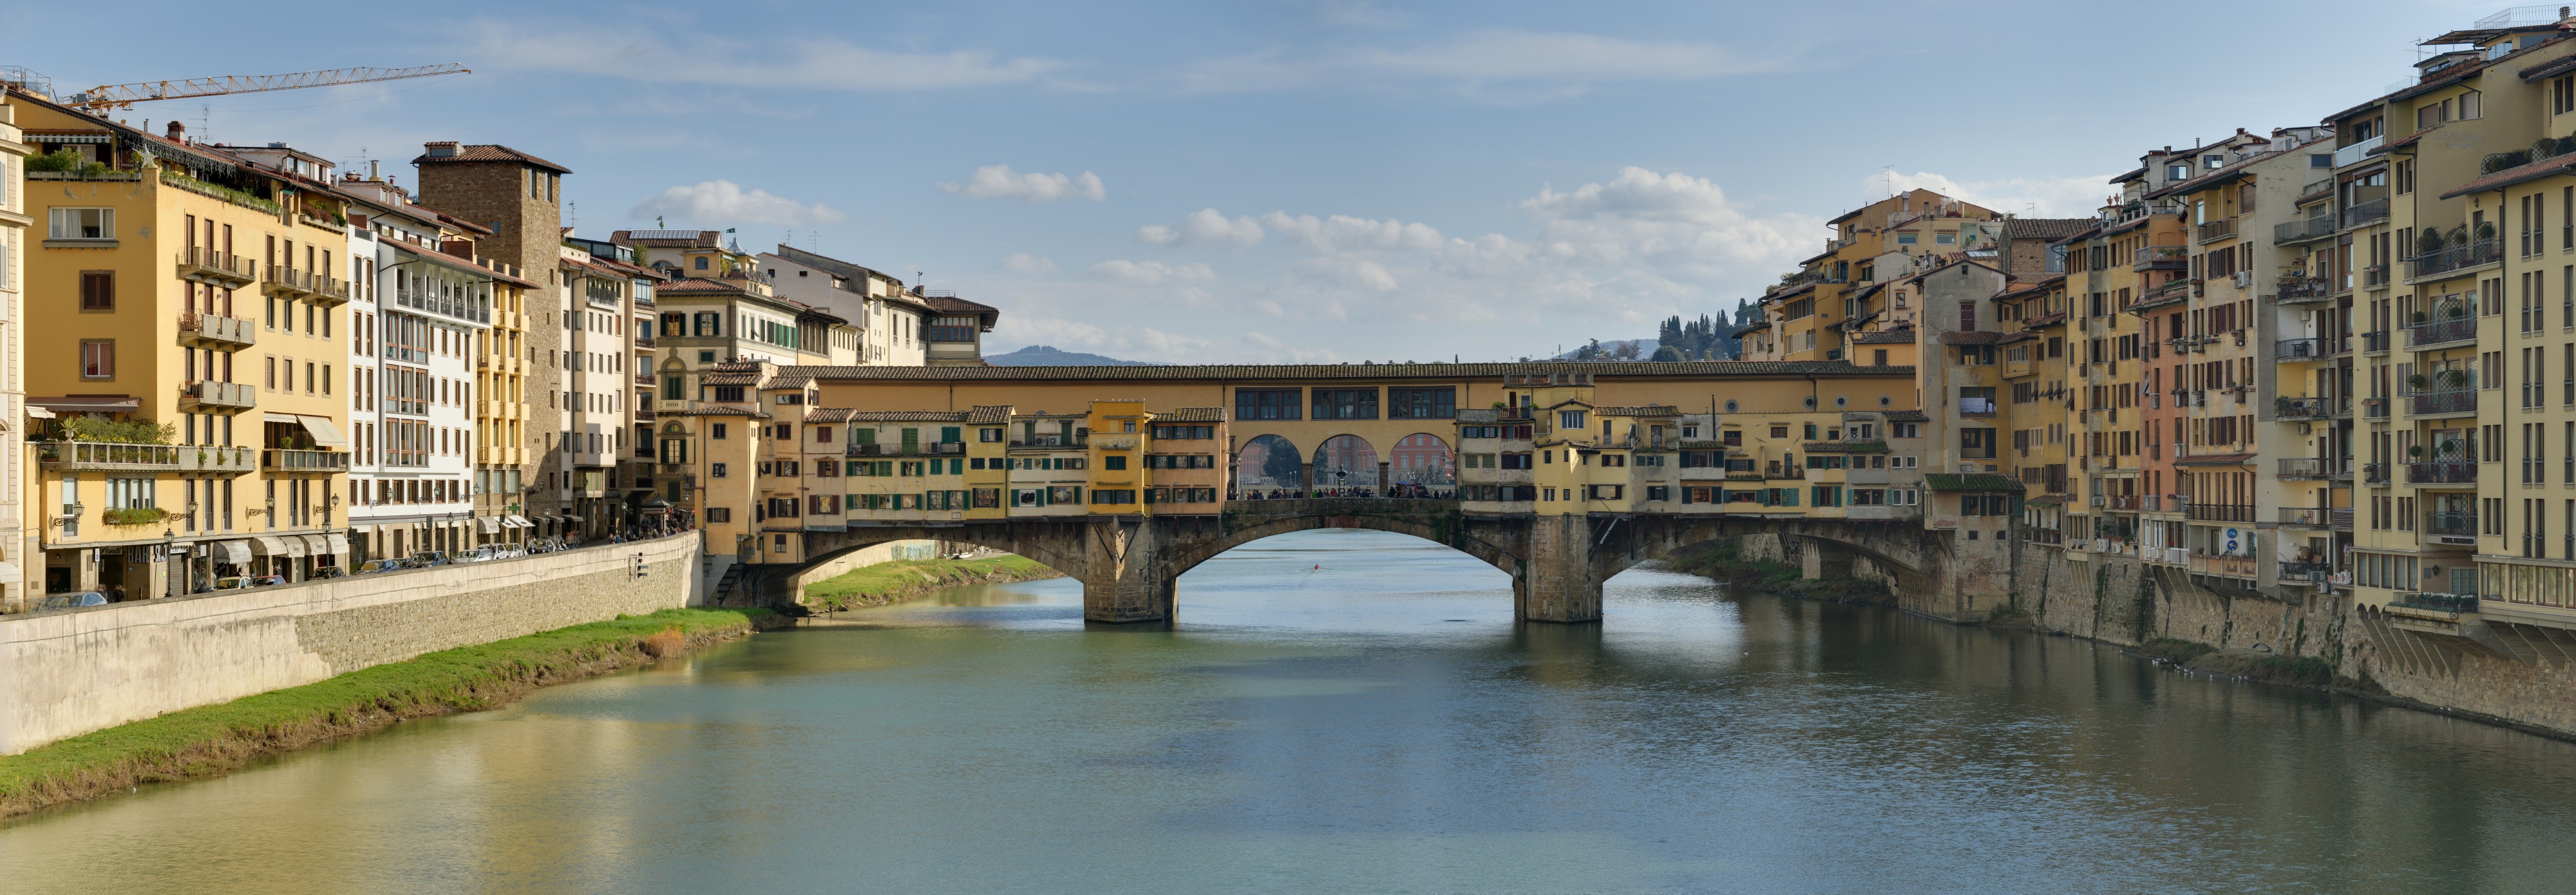 Panorama of the Ponte Vecchio in Florence, Italy